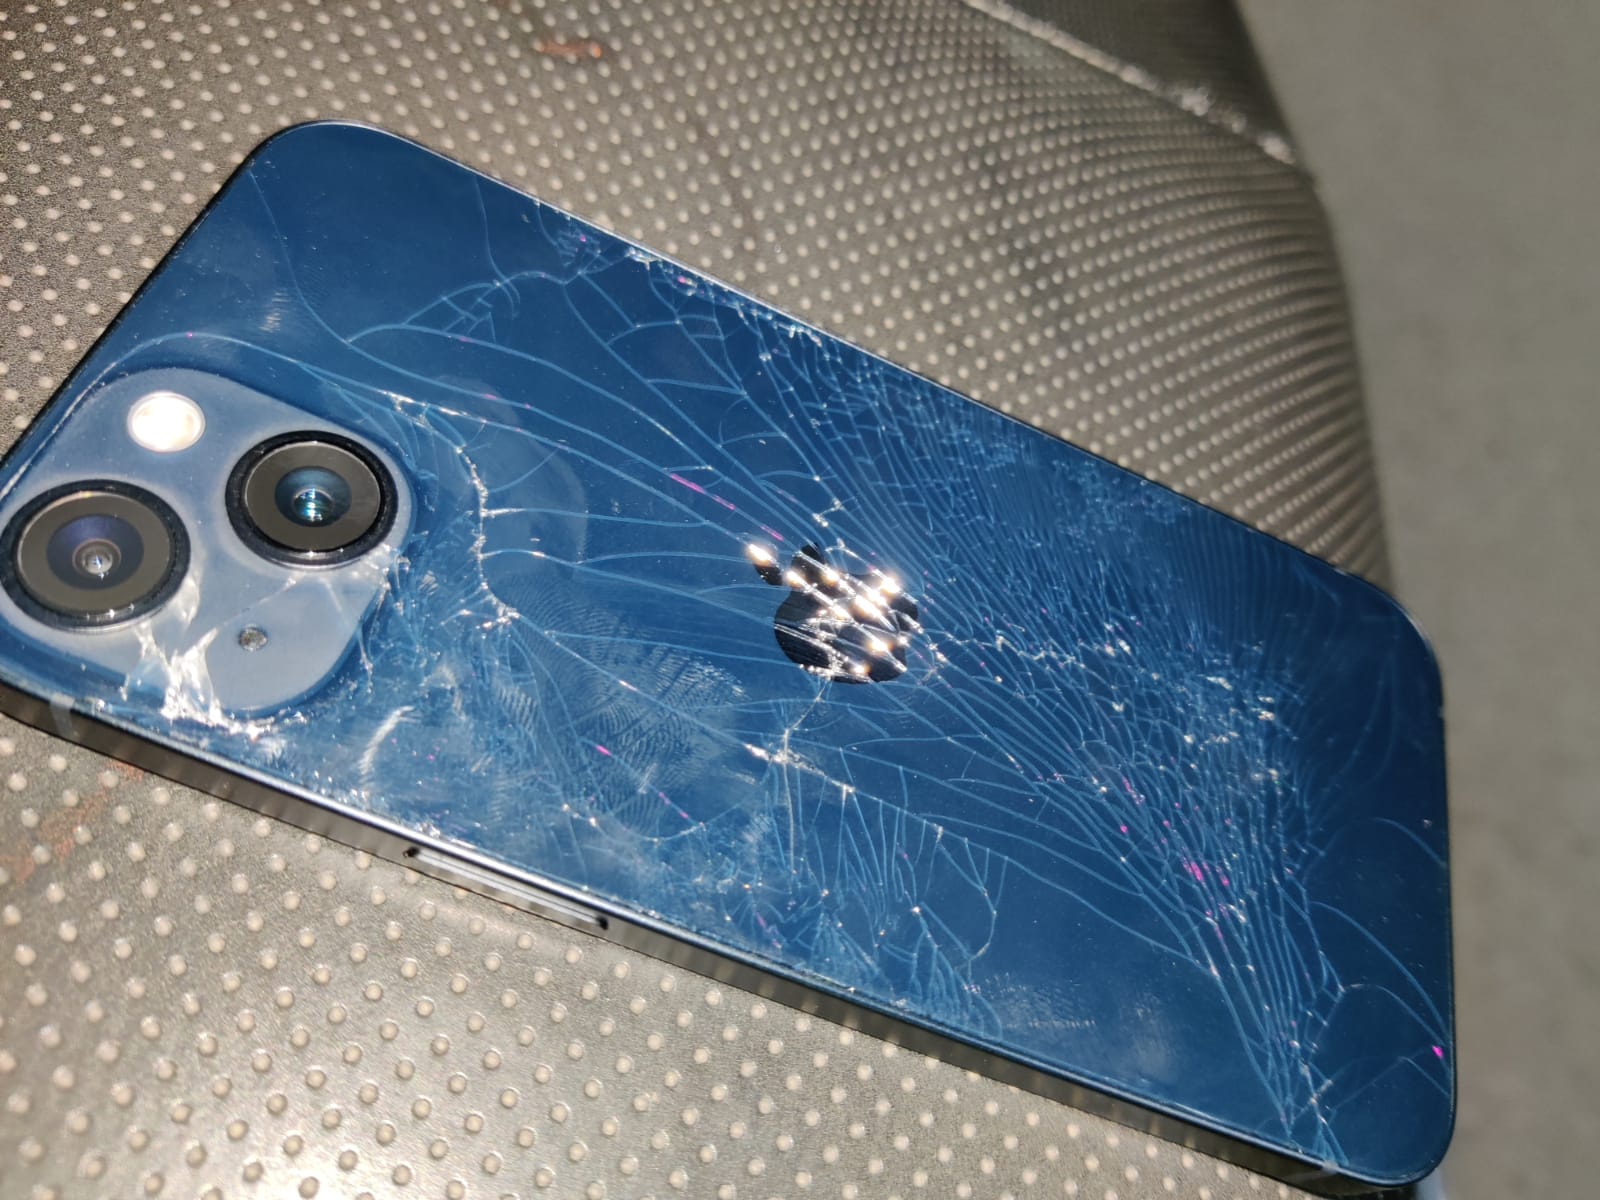 How much does an iPhone back glass repair cost?